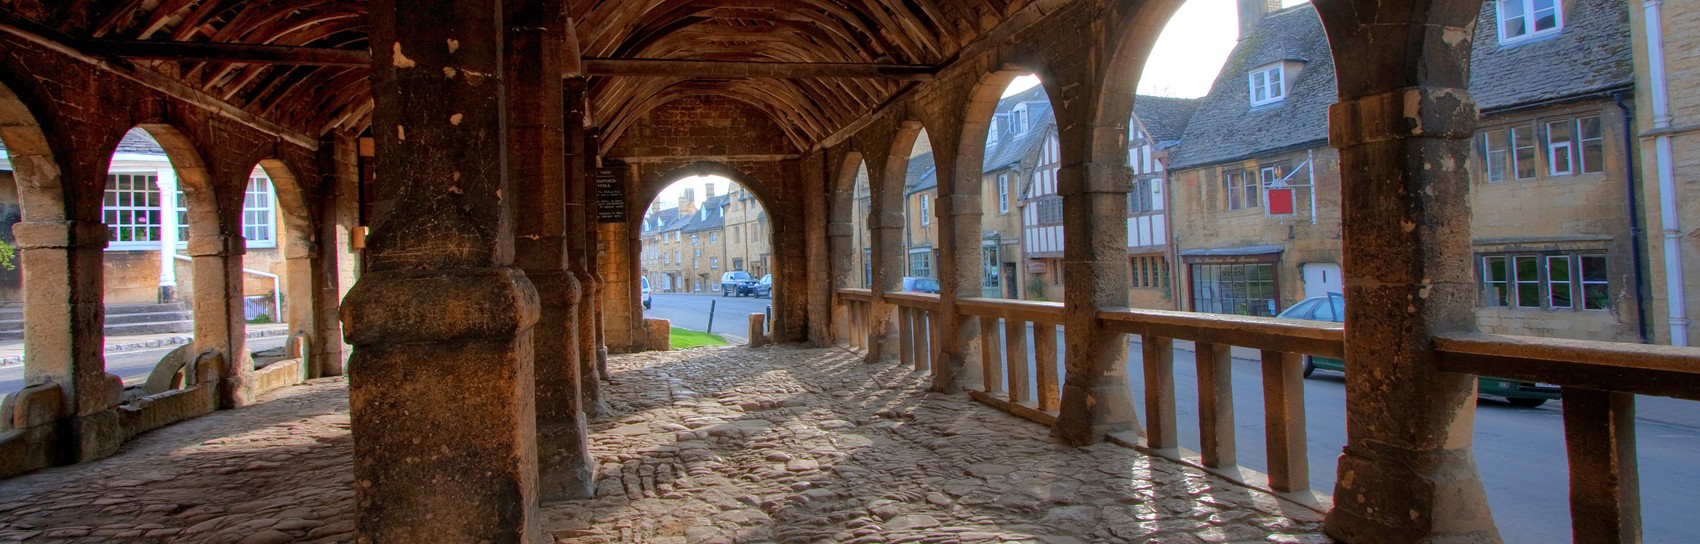 The Market Hall in Chipping Campden. Photograph by GAIL JOHNSON